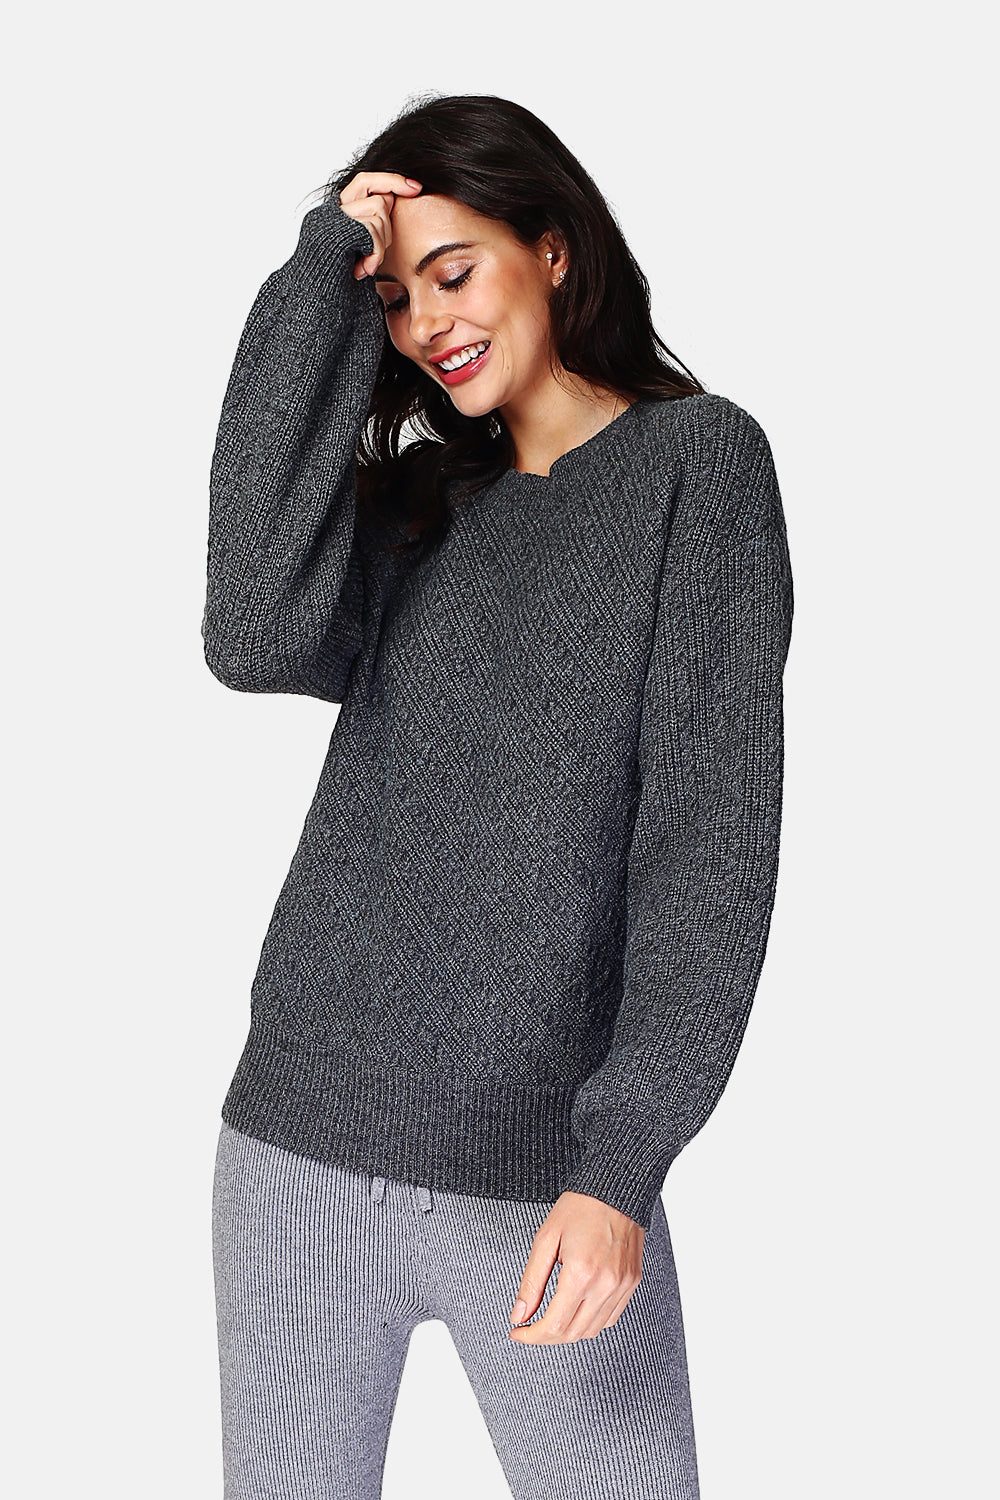 Fancy knit round neck sweater with slightly balloon long sleeves